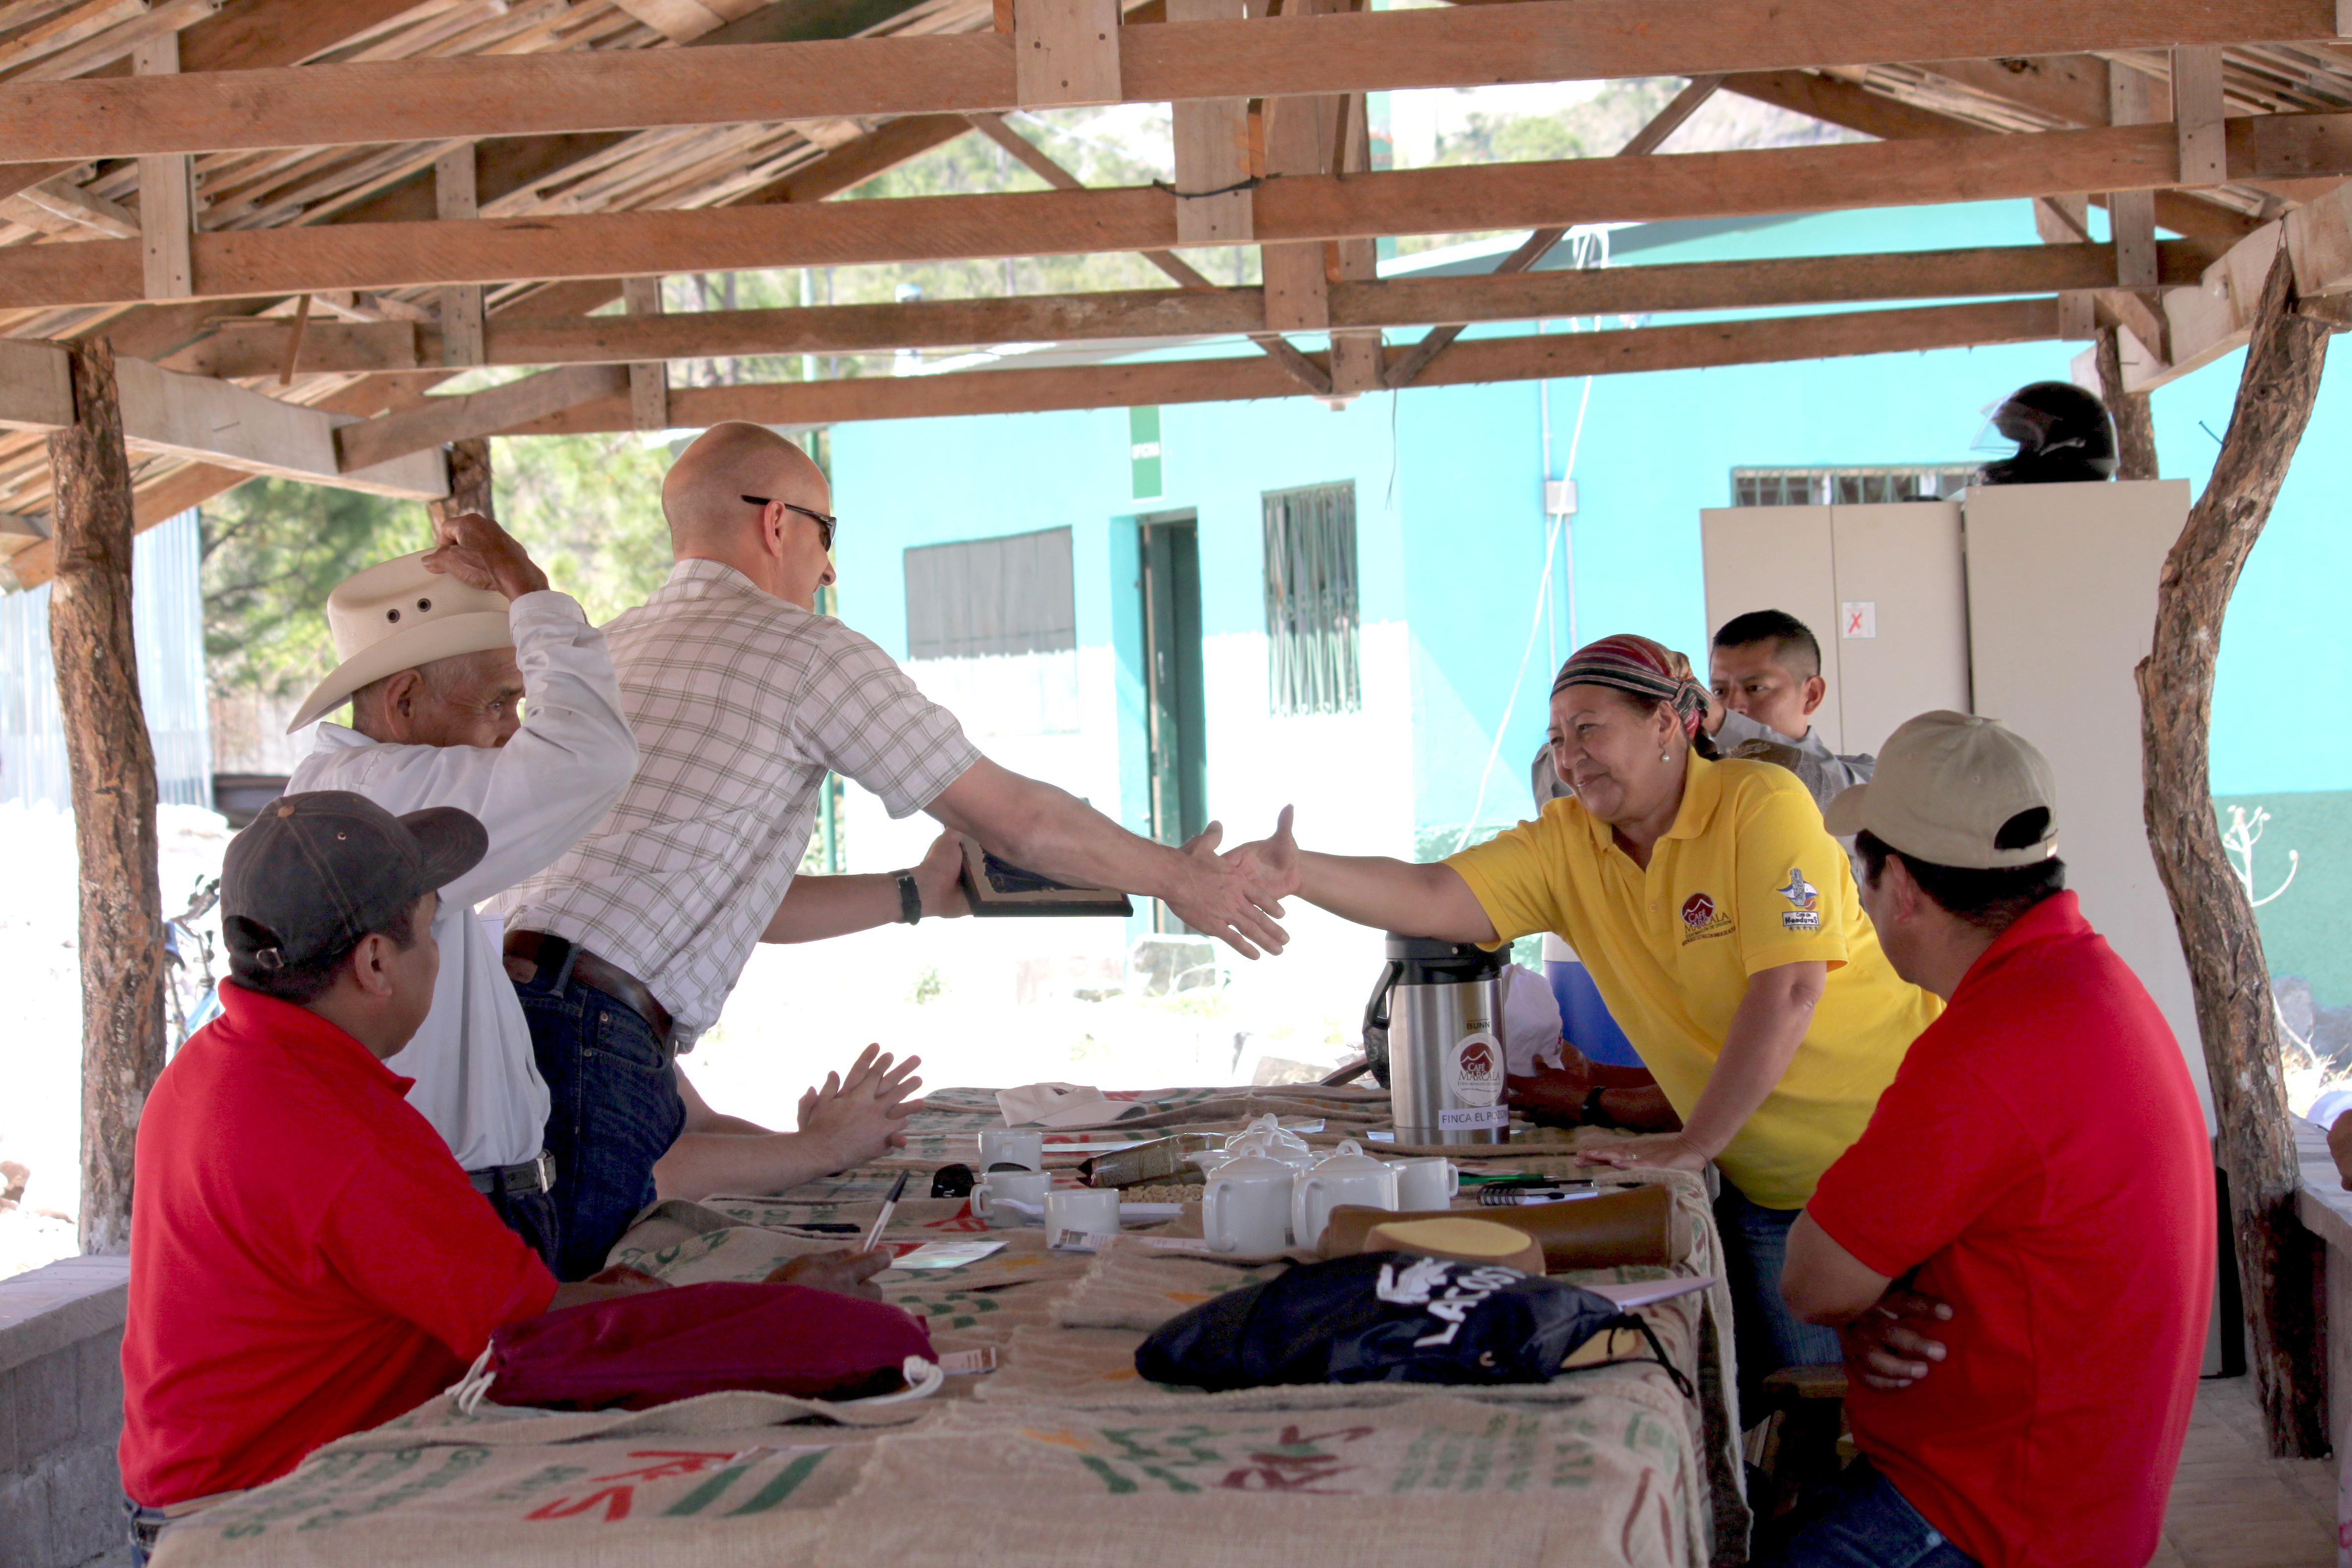 Melba Sosa of RAOS shakes hands with Willy Foote across a table with other members f the cooperative.